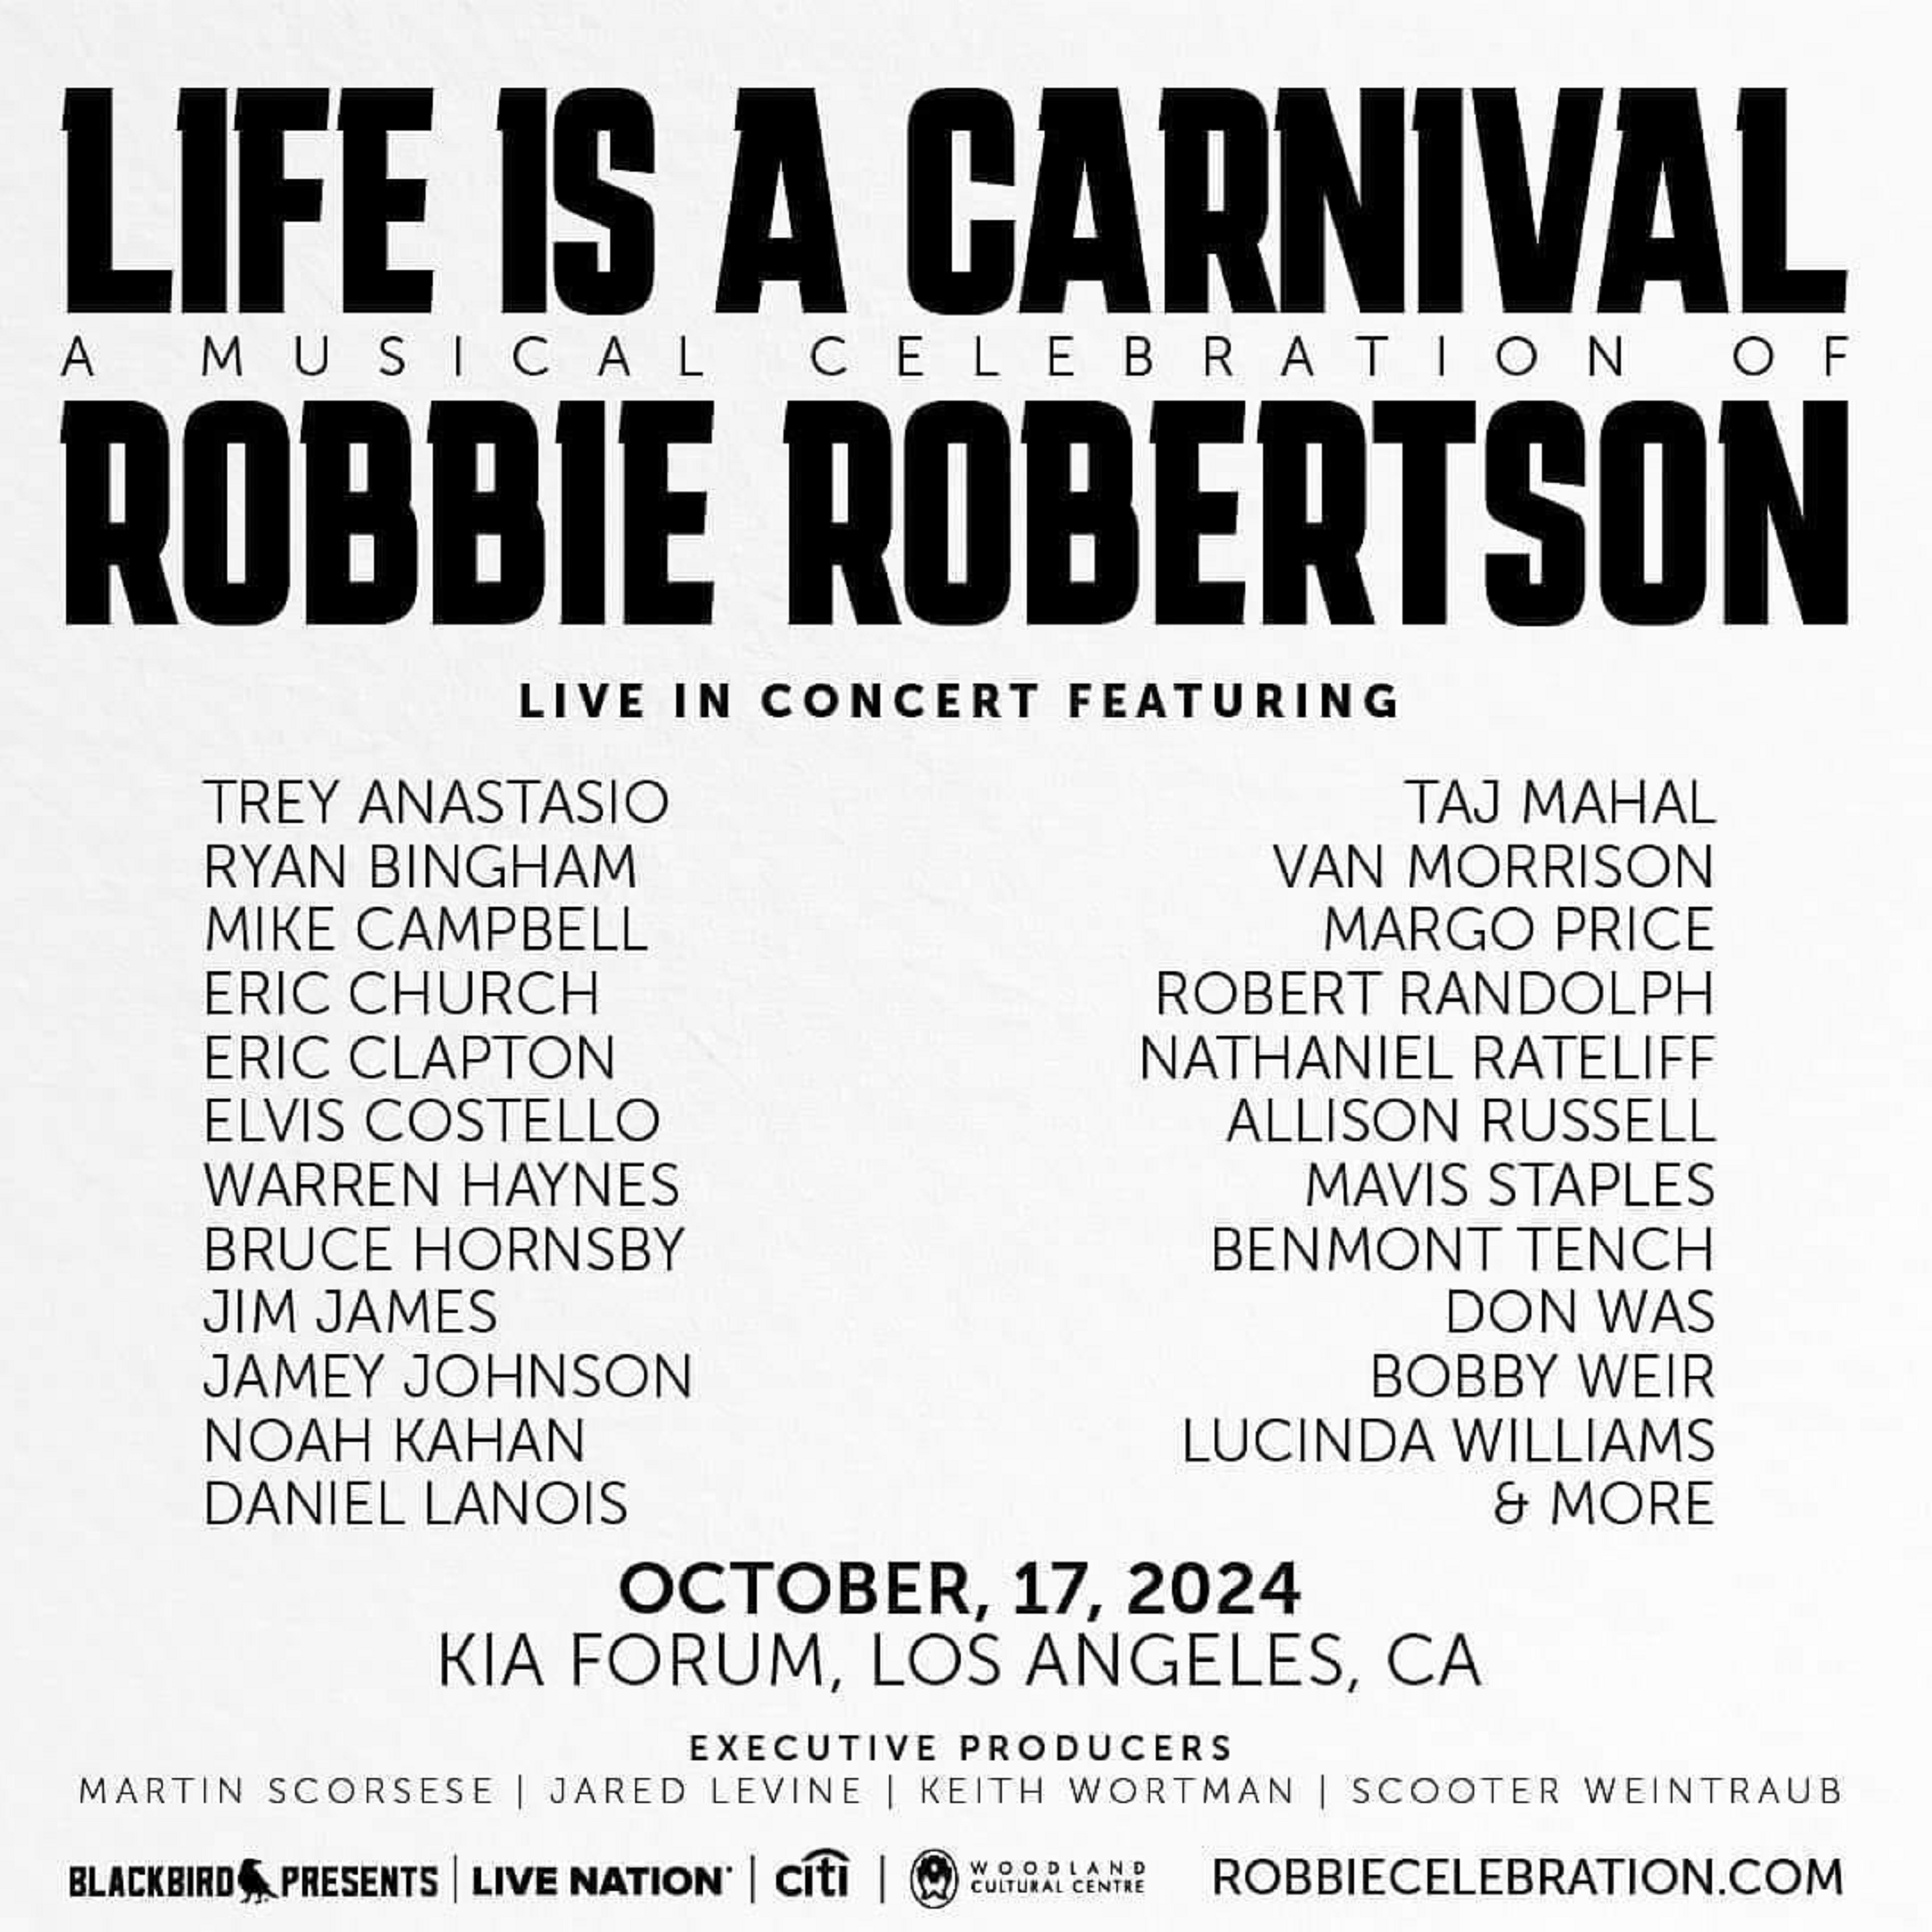 Life Is a Carnival: A Musical Celebration of Robbie Robertson